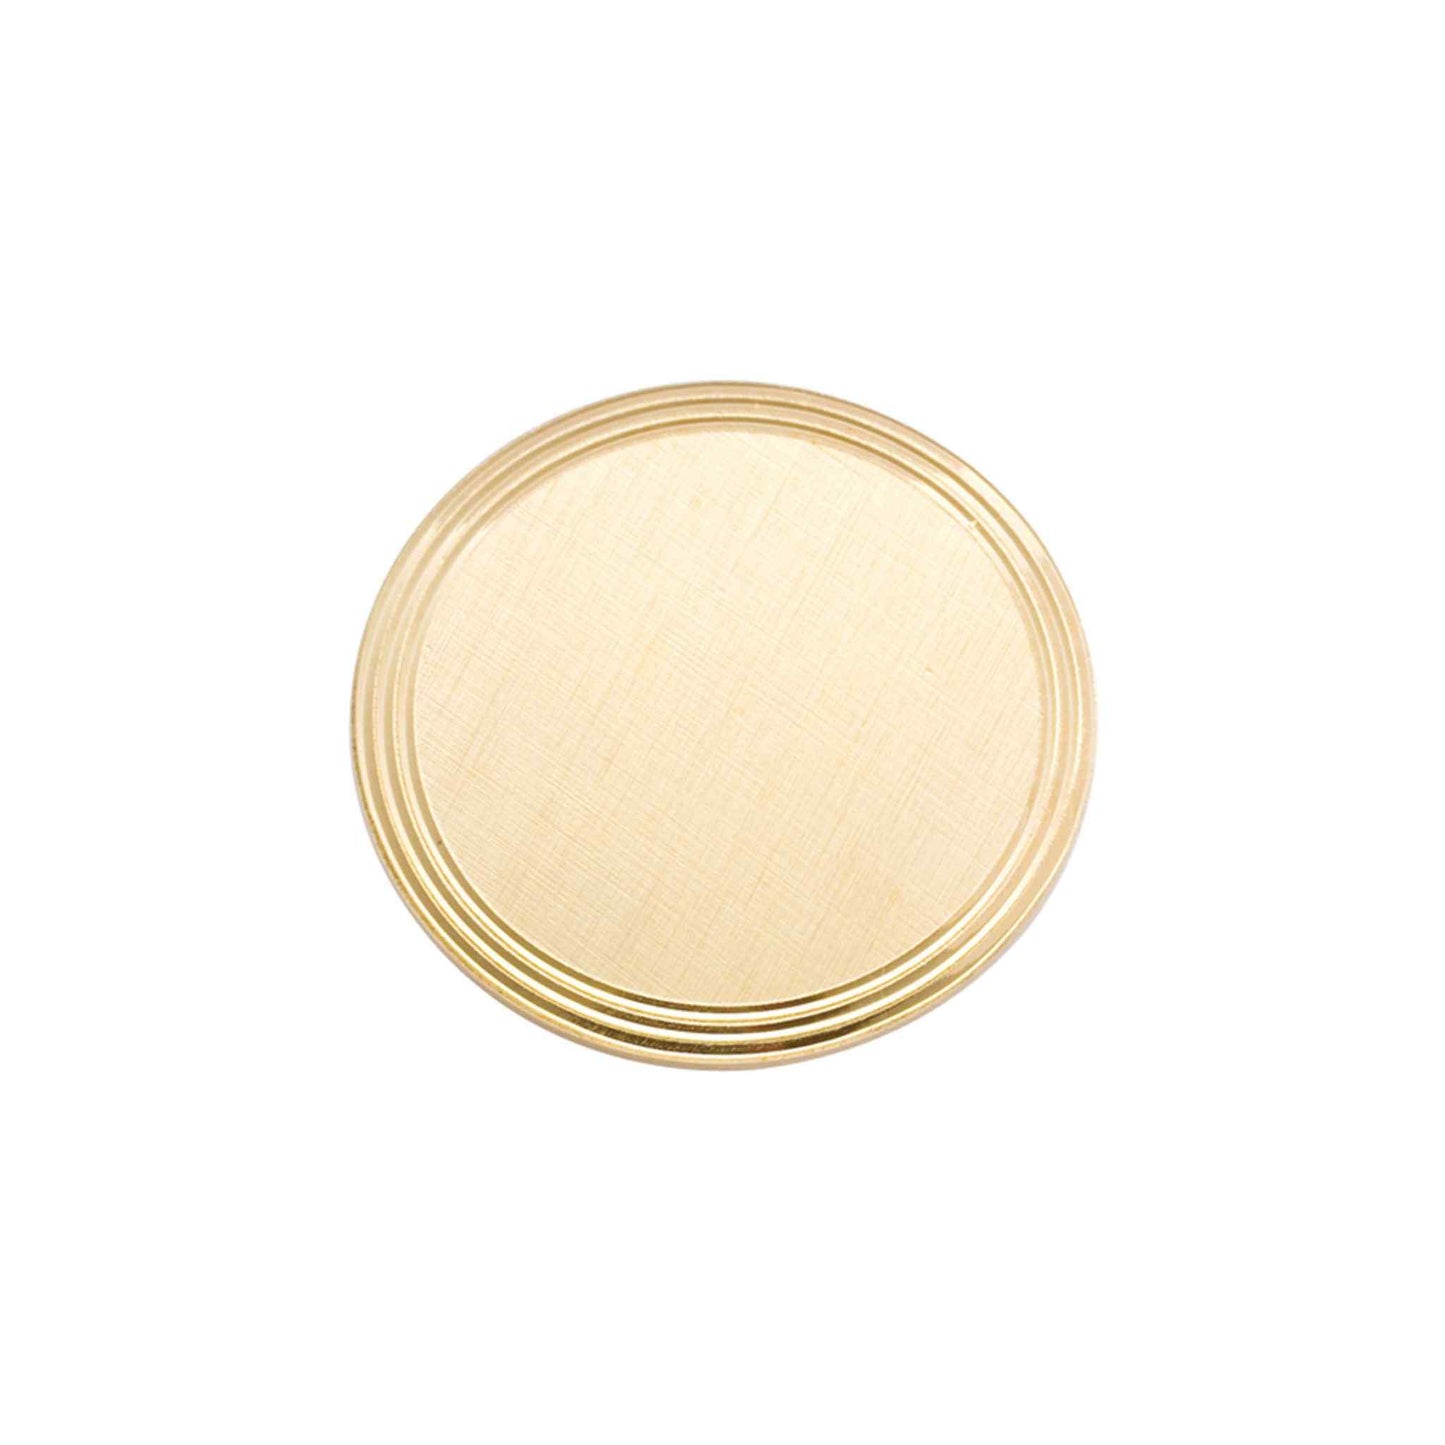 A round florentine finish pin with three ring edge displayed on a neutral white background.